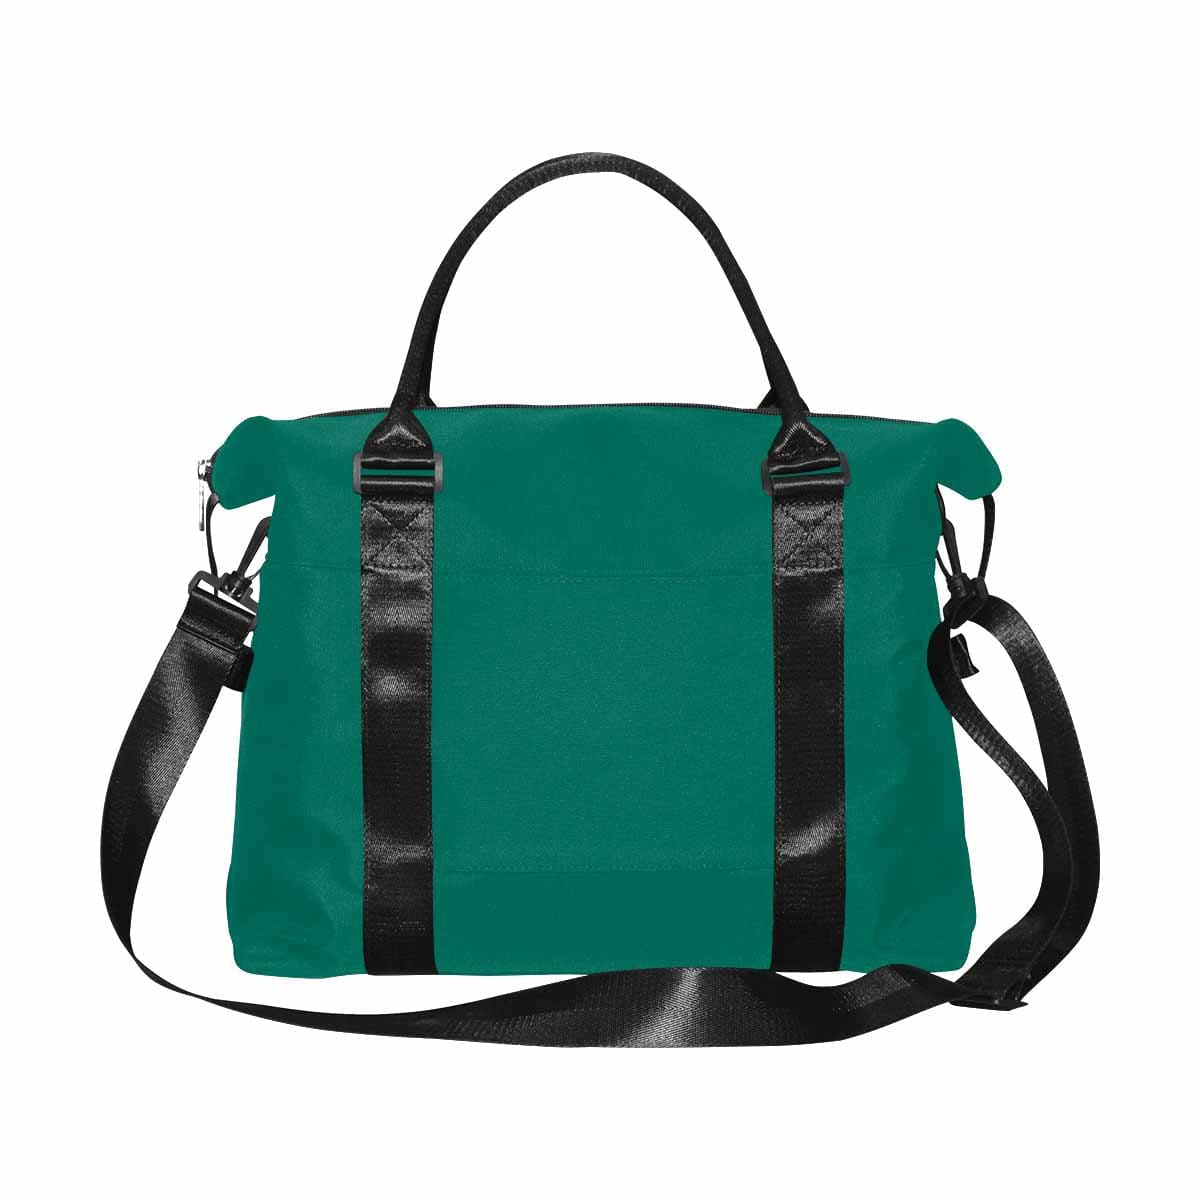 Travel Bag Teal Green Canvas Carry On - Bags | Travel Bags | Canvas Carry